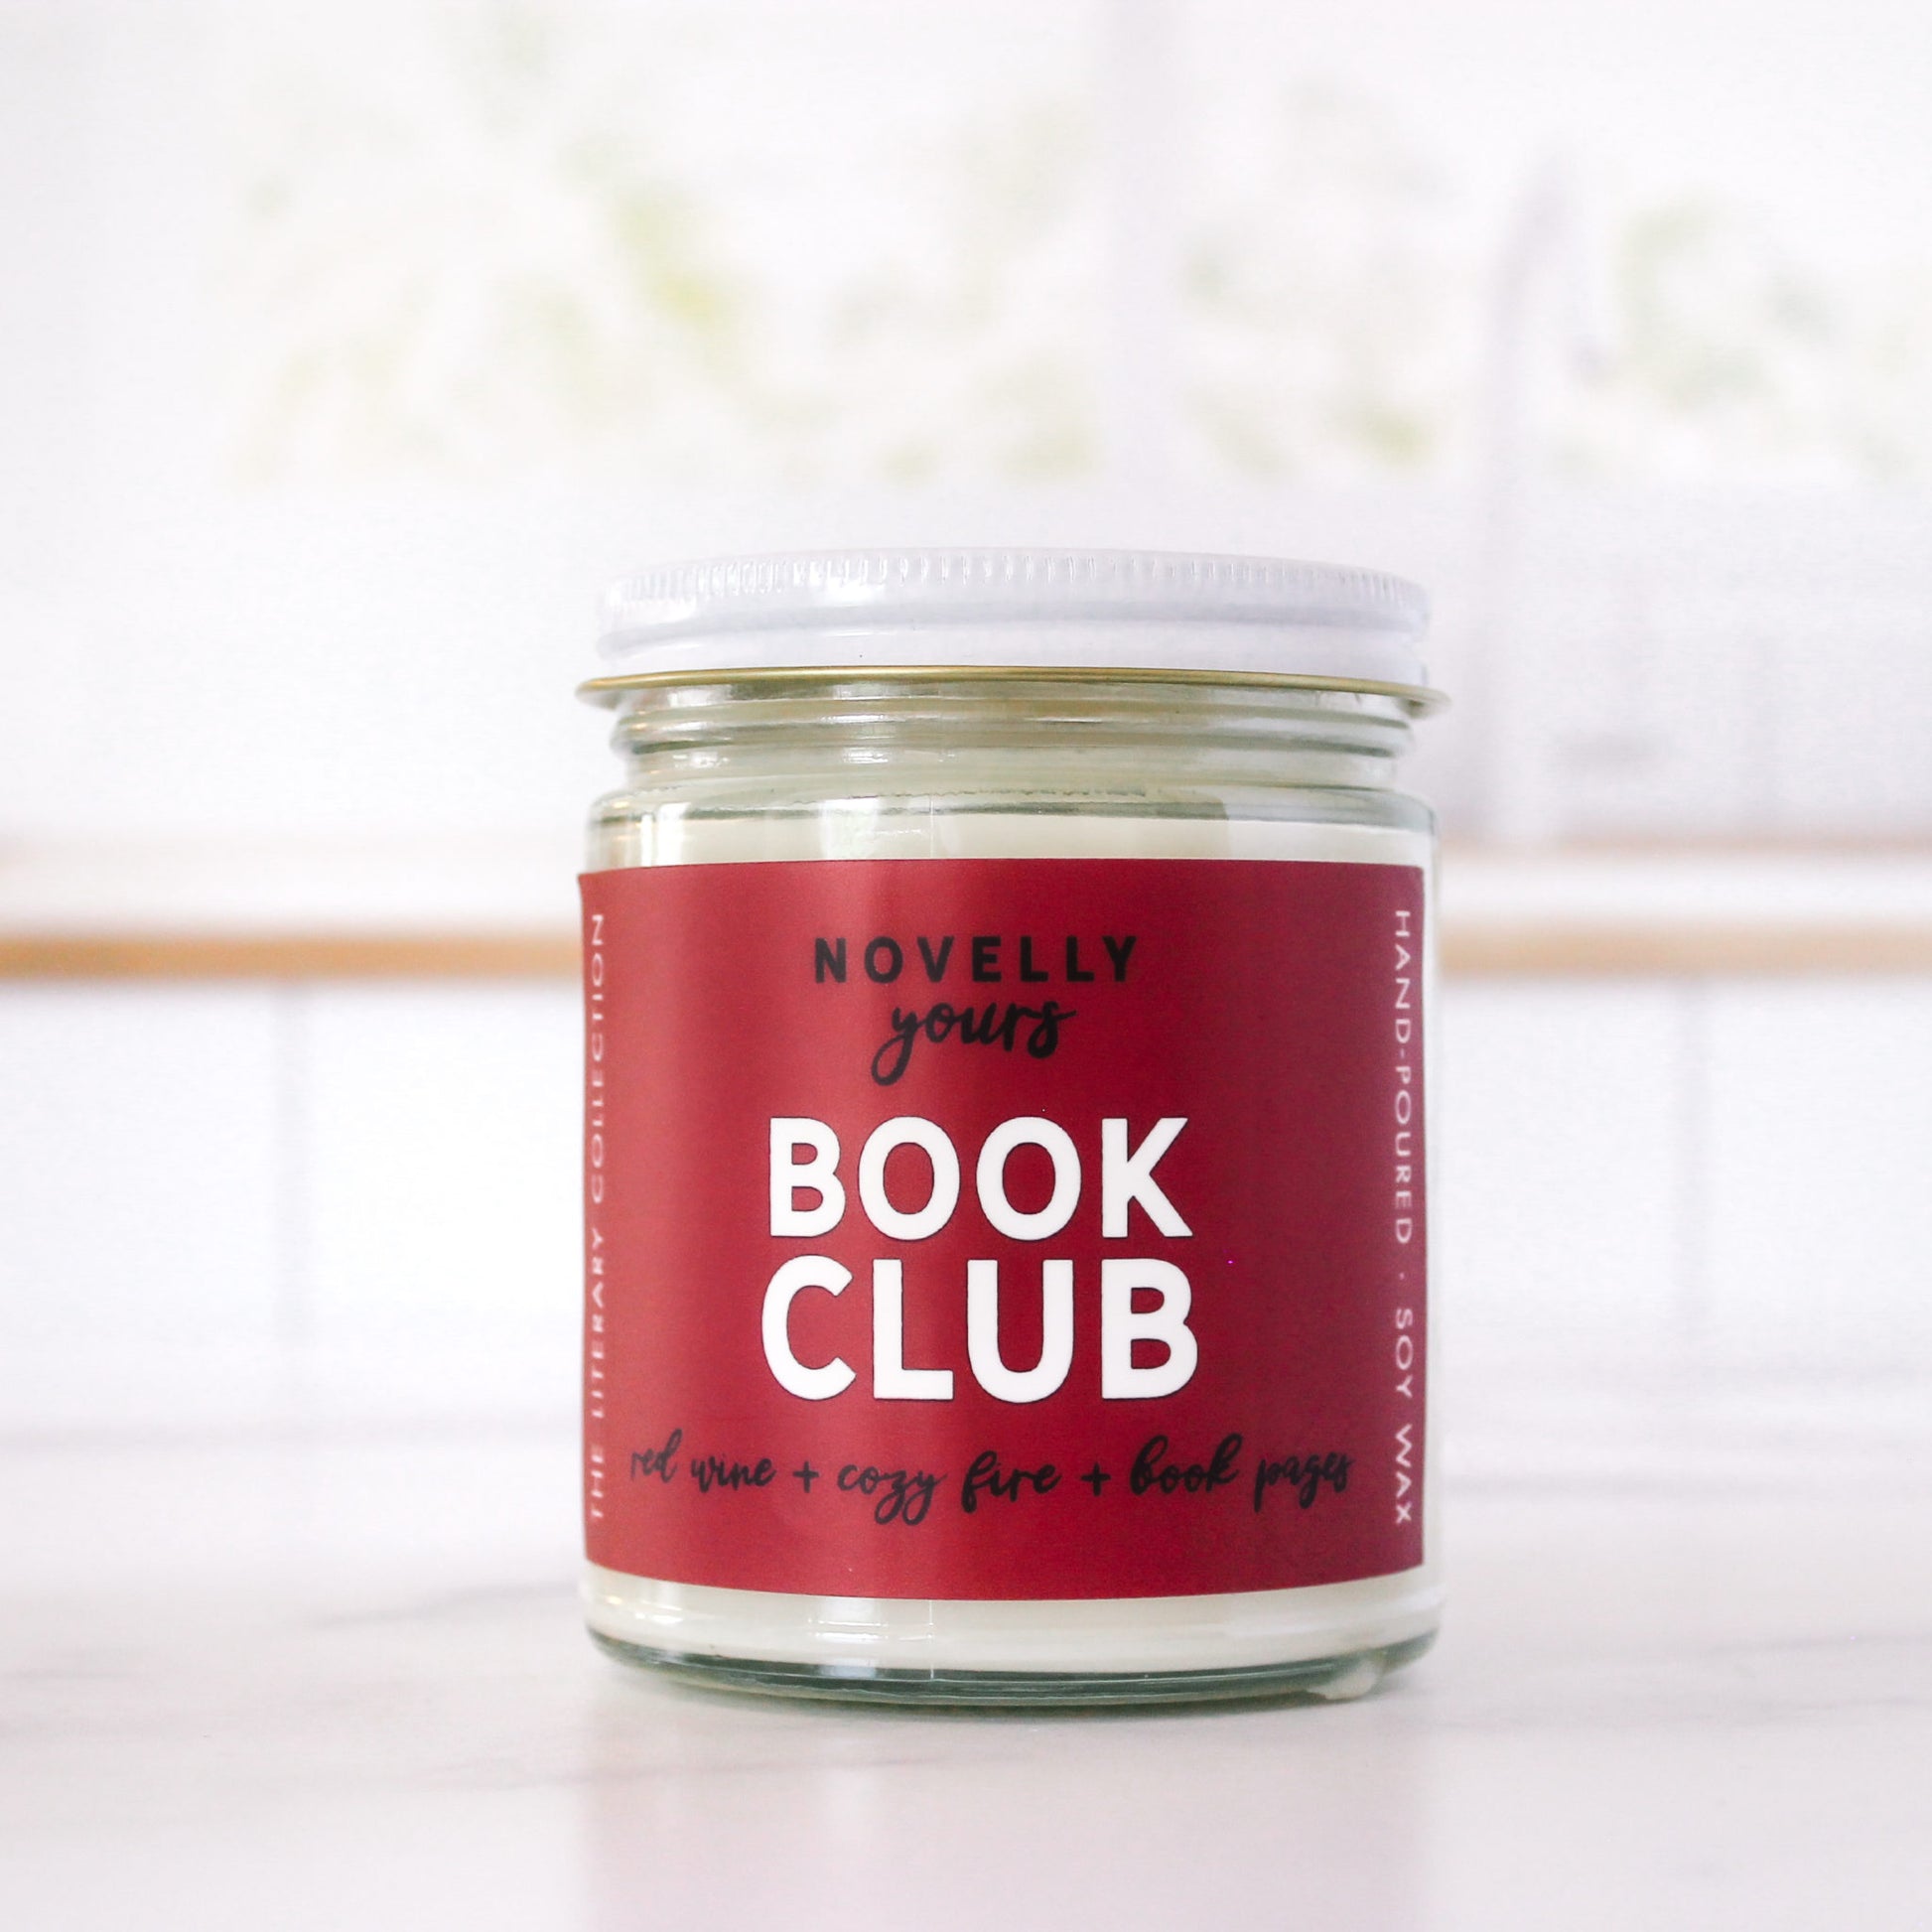 book-inspired "Book Club" candle with wine red label sits in front of red brick background